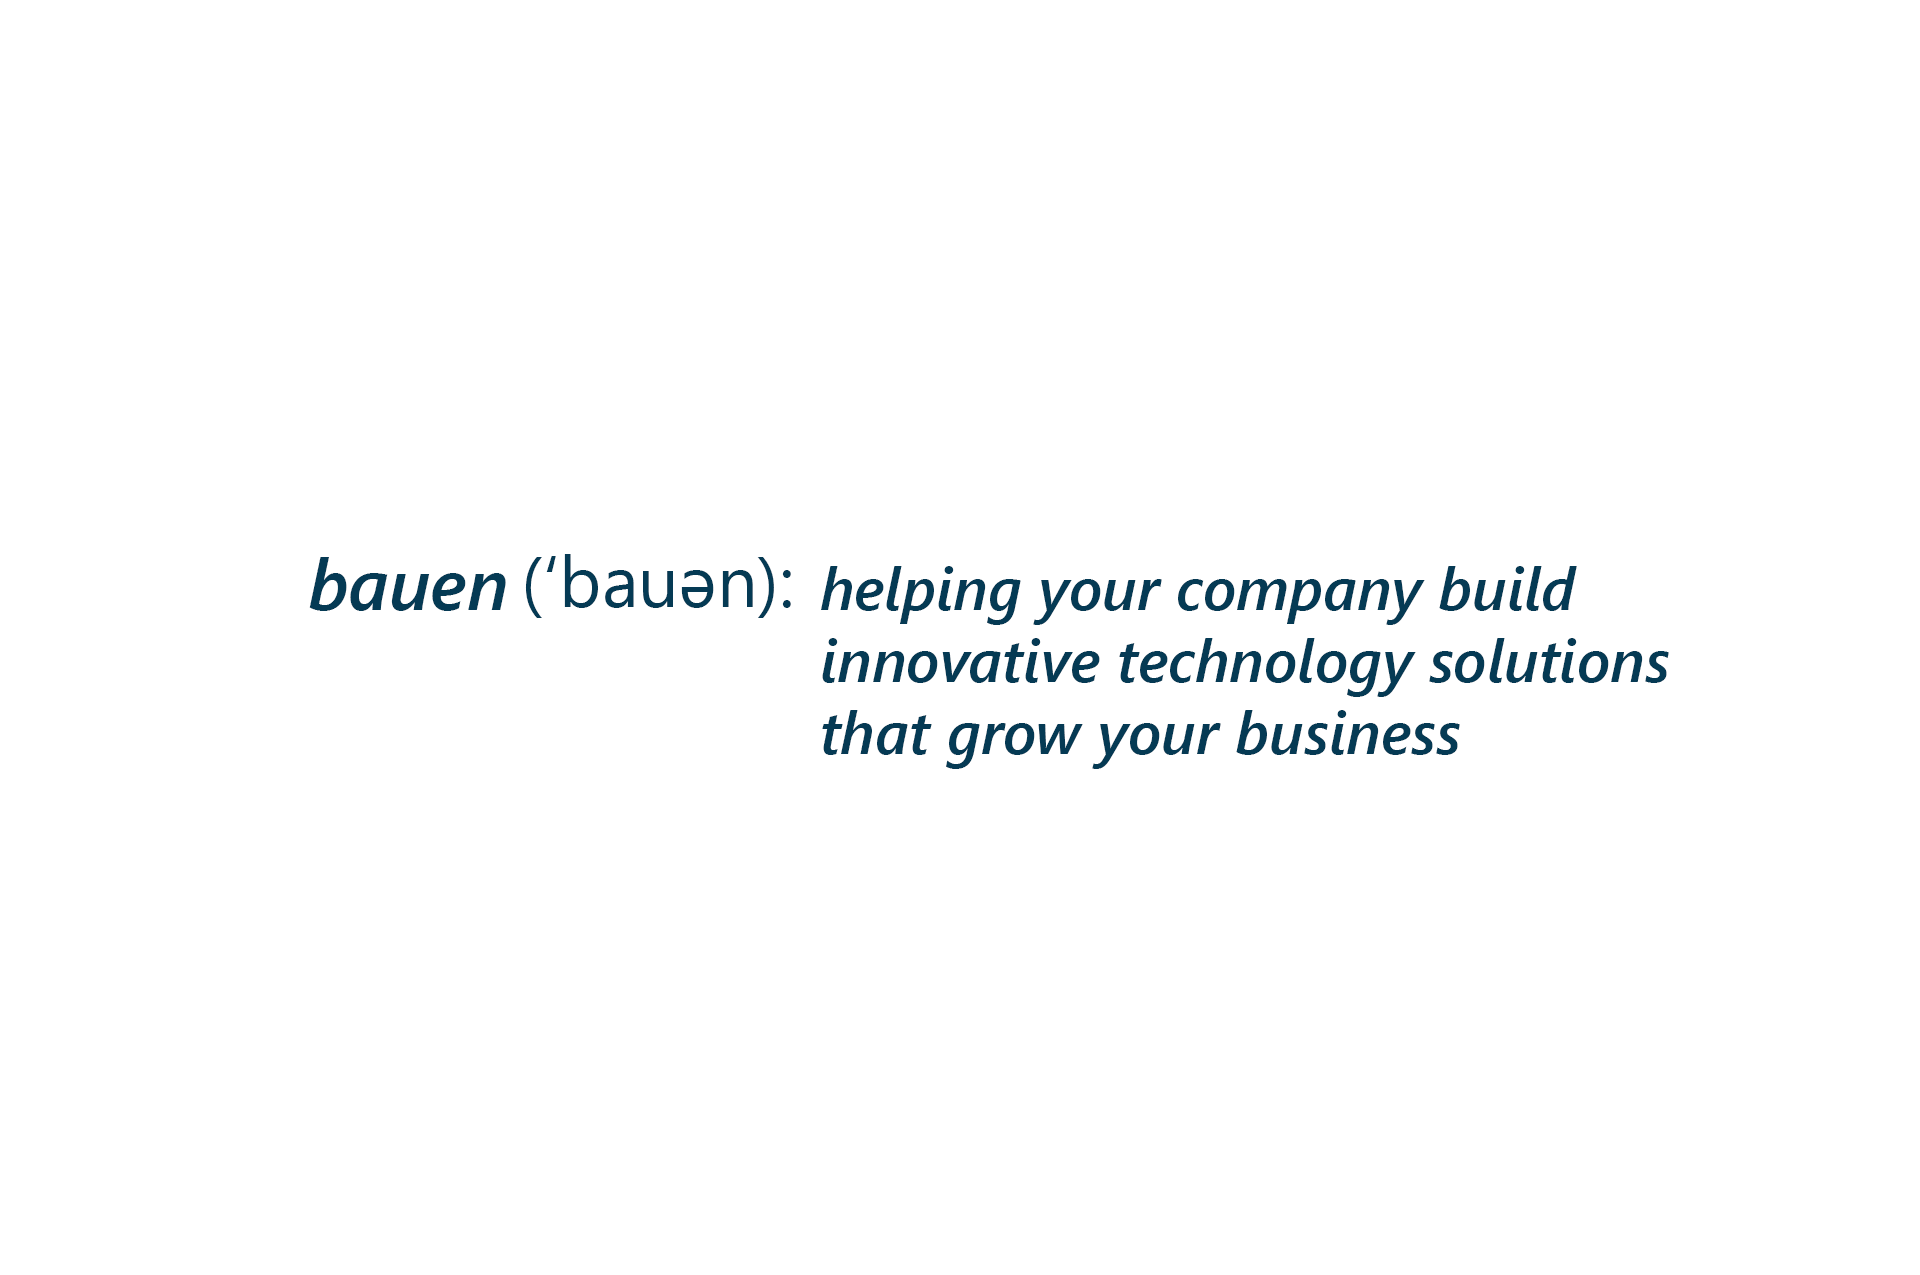 bauen: helping your company build innovative technology solutions that grow your business